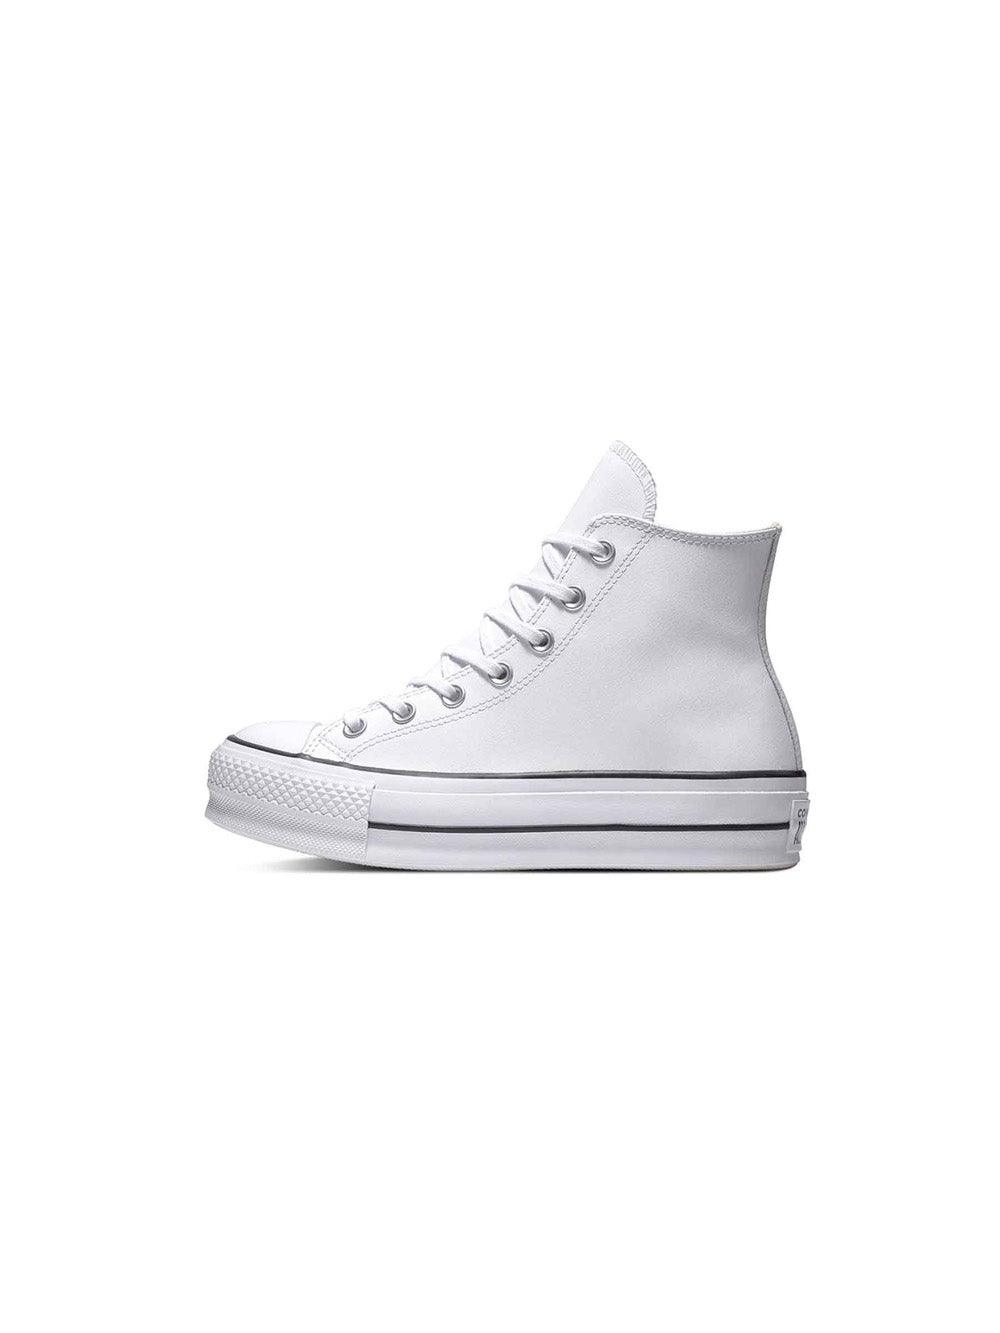 Converse | Clean Leather Platform Chuck Taylor All Star White/Black/White 2 | Milagron